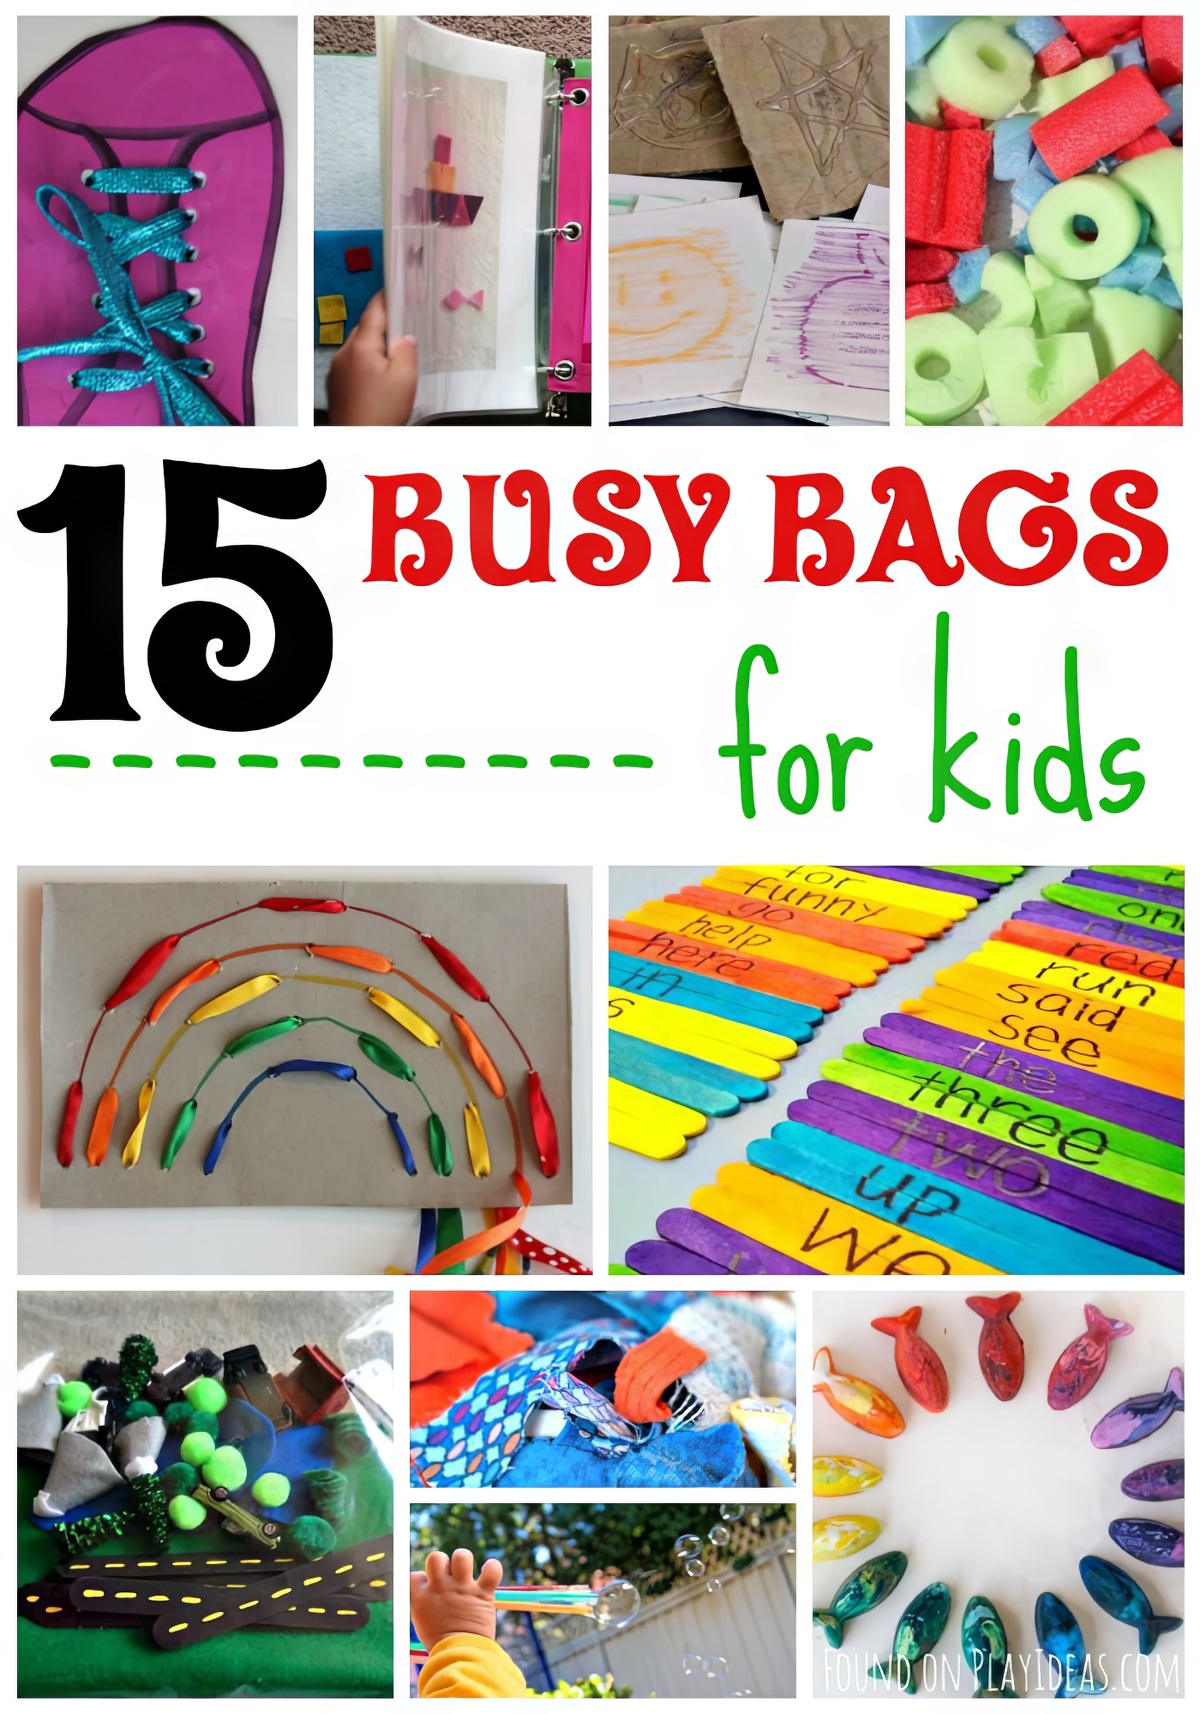 Busy Bags collage of 25 busy bag ideas for kids to enjoy - pinnable image